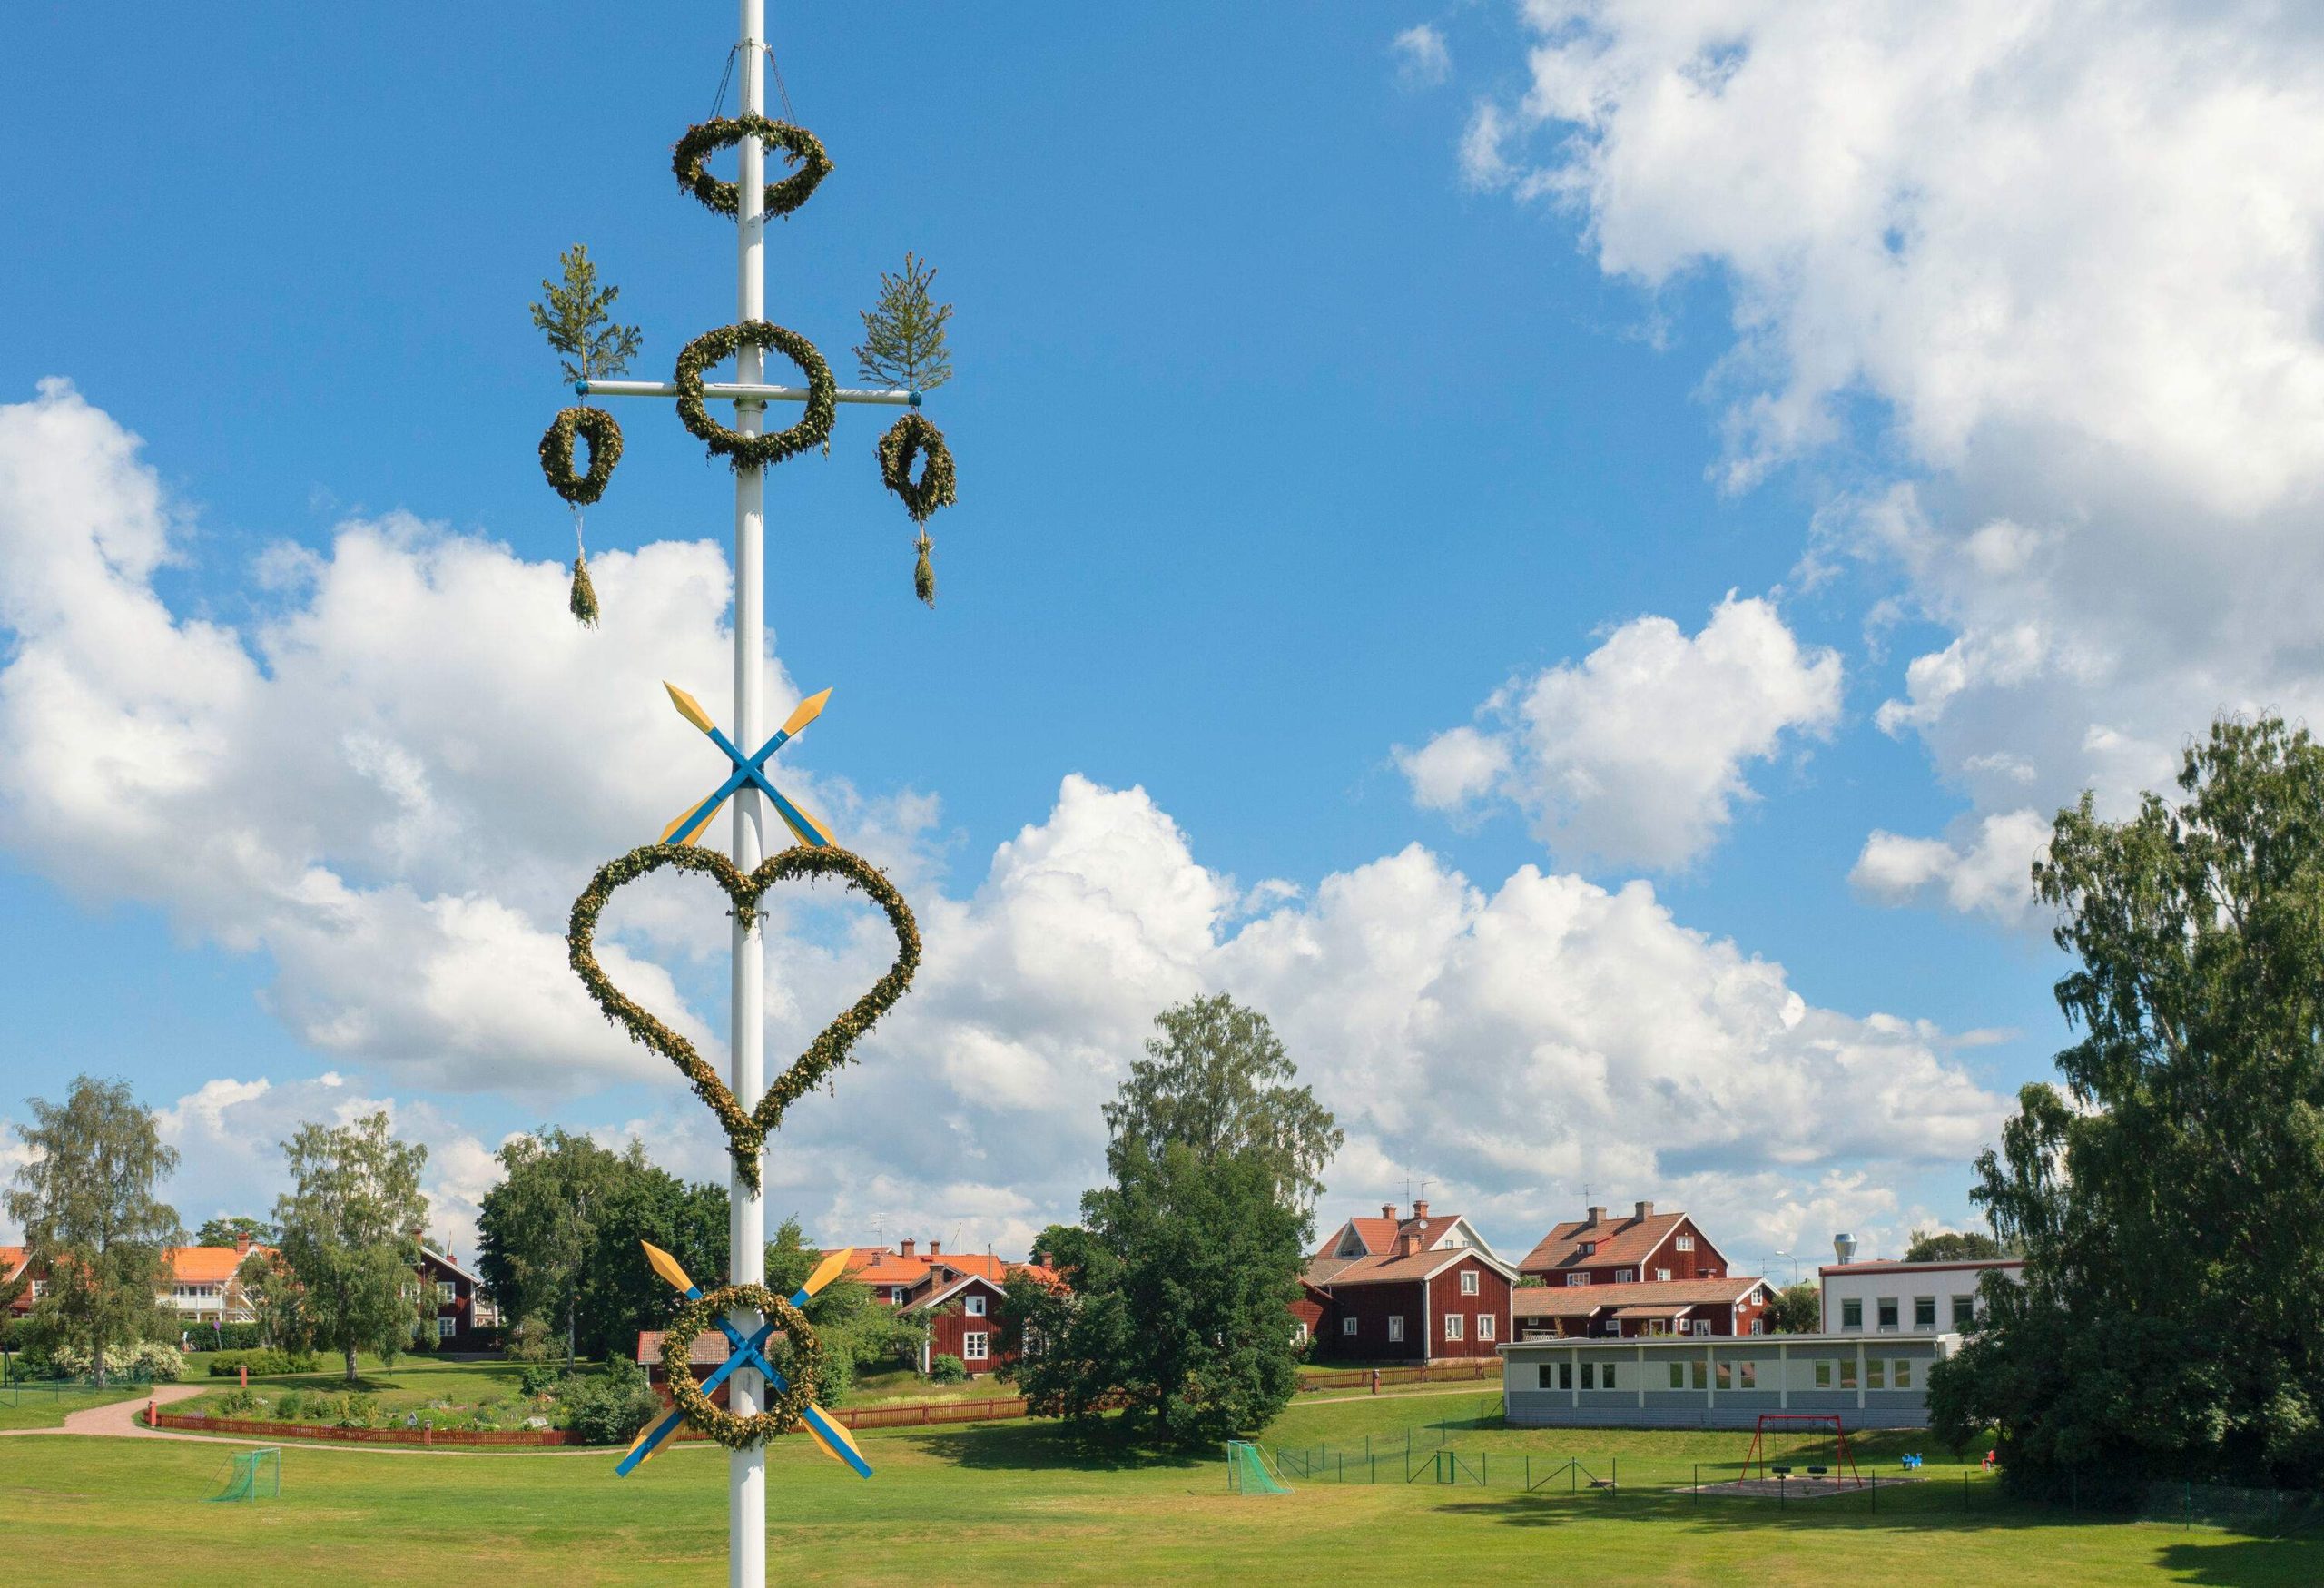 A white pole decorated with heart and circle flower garlands in a green park.